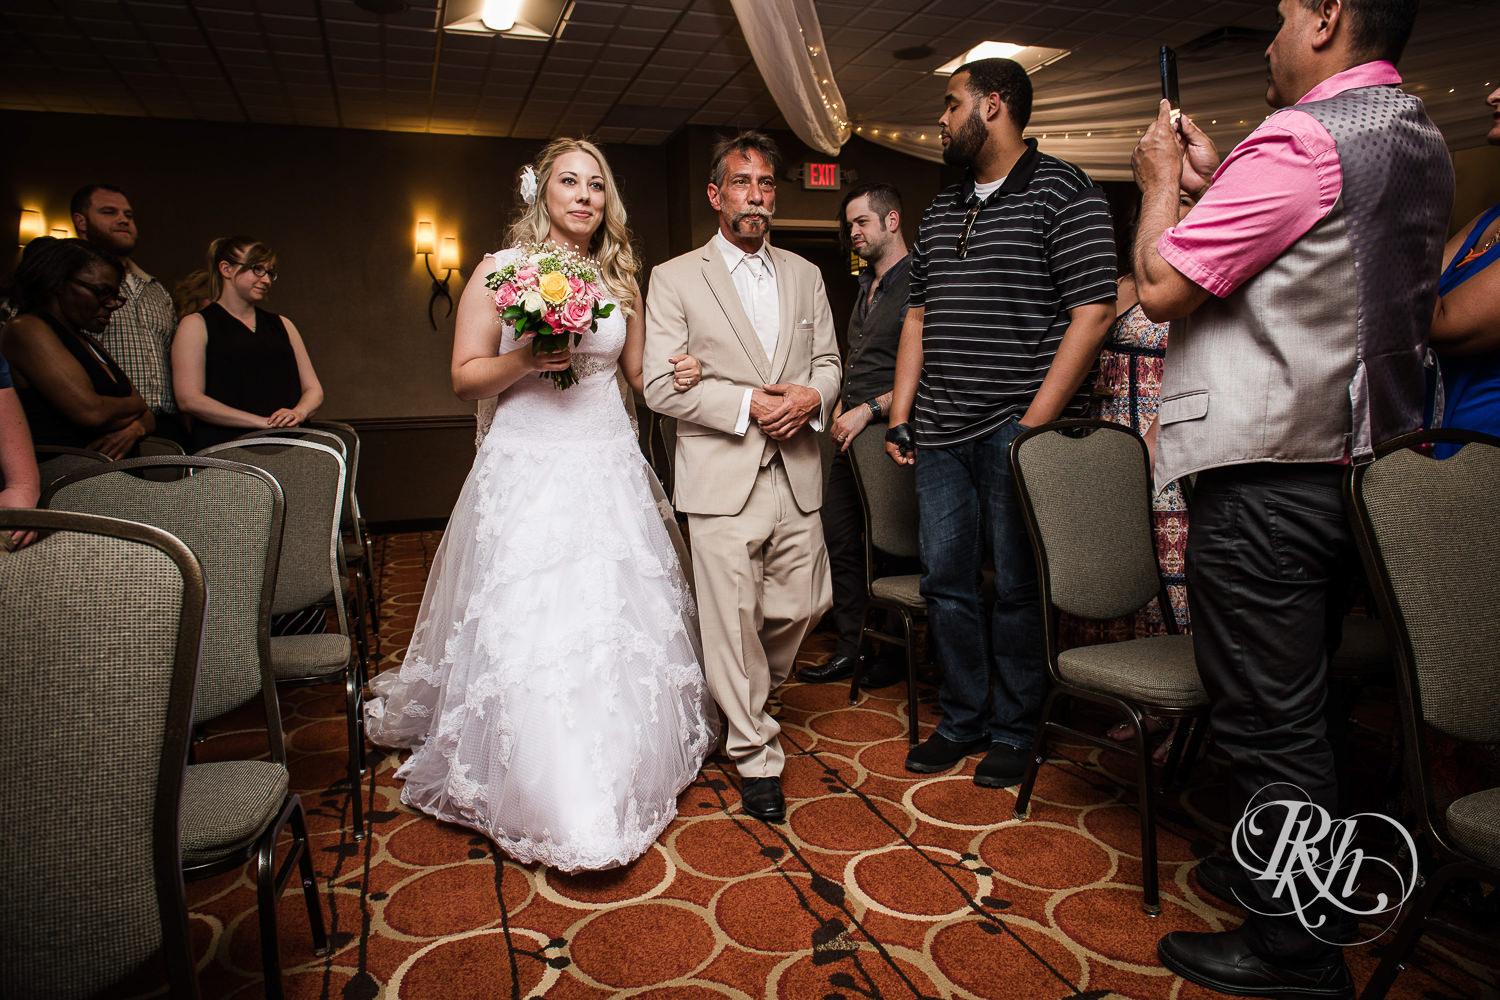 Bride walks down the aisle during wedding ceremony at North Metro Event Center in Shoreview, Minnesota.